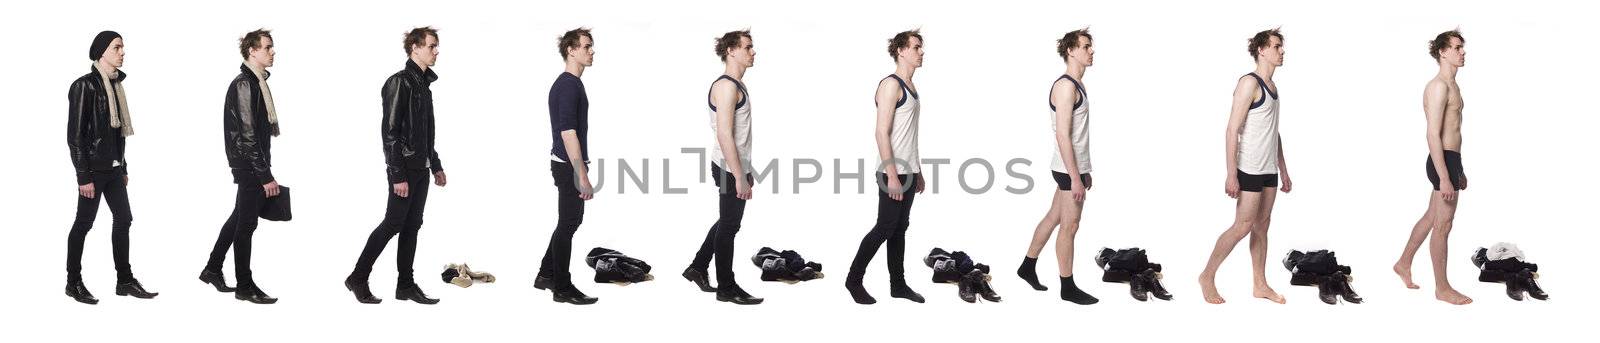 Man taking his clothes of step by step by gemenacom